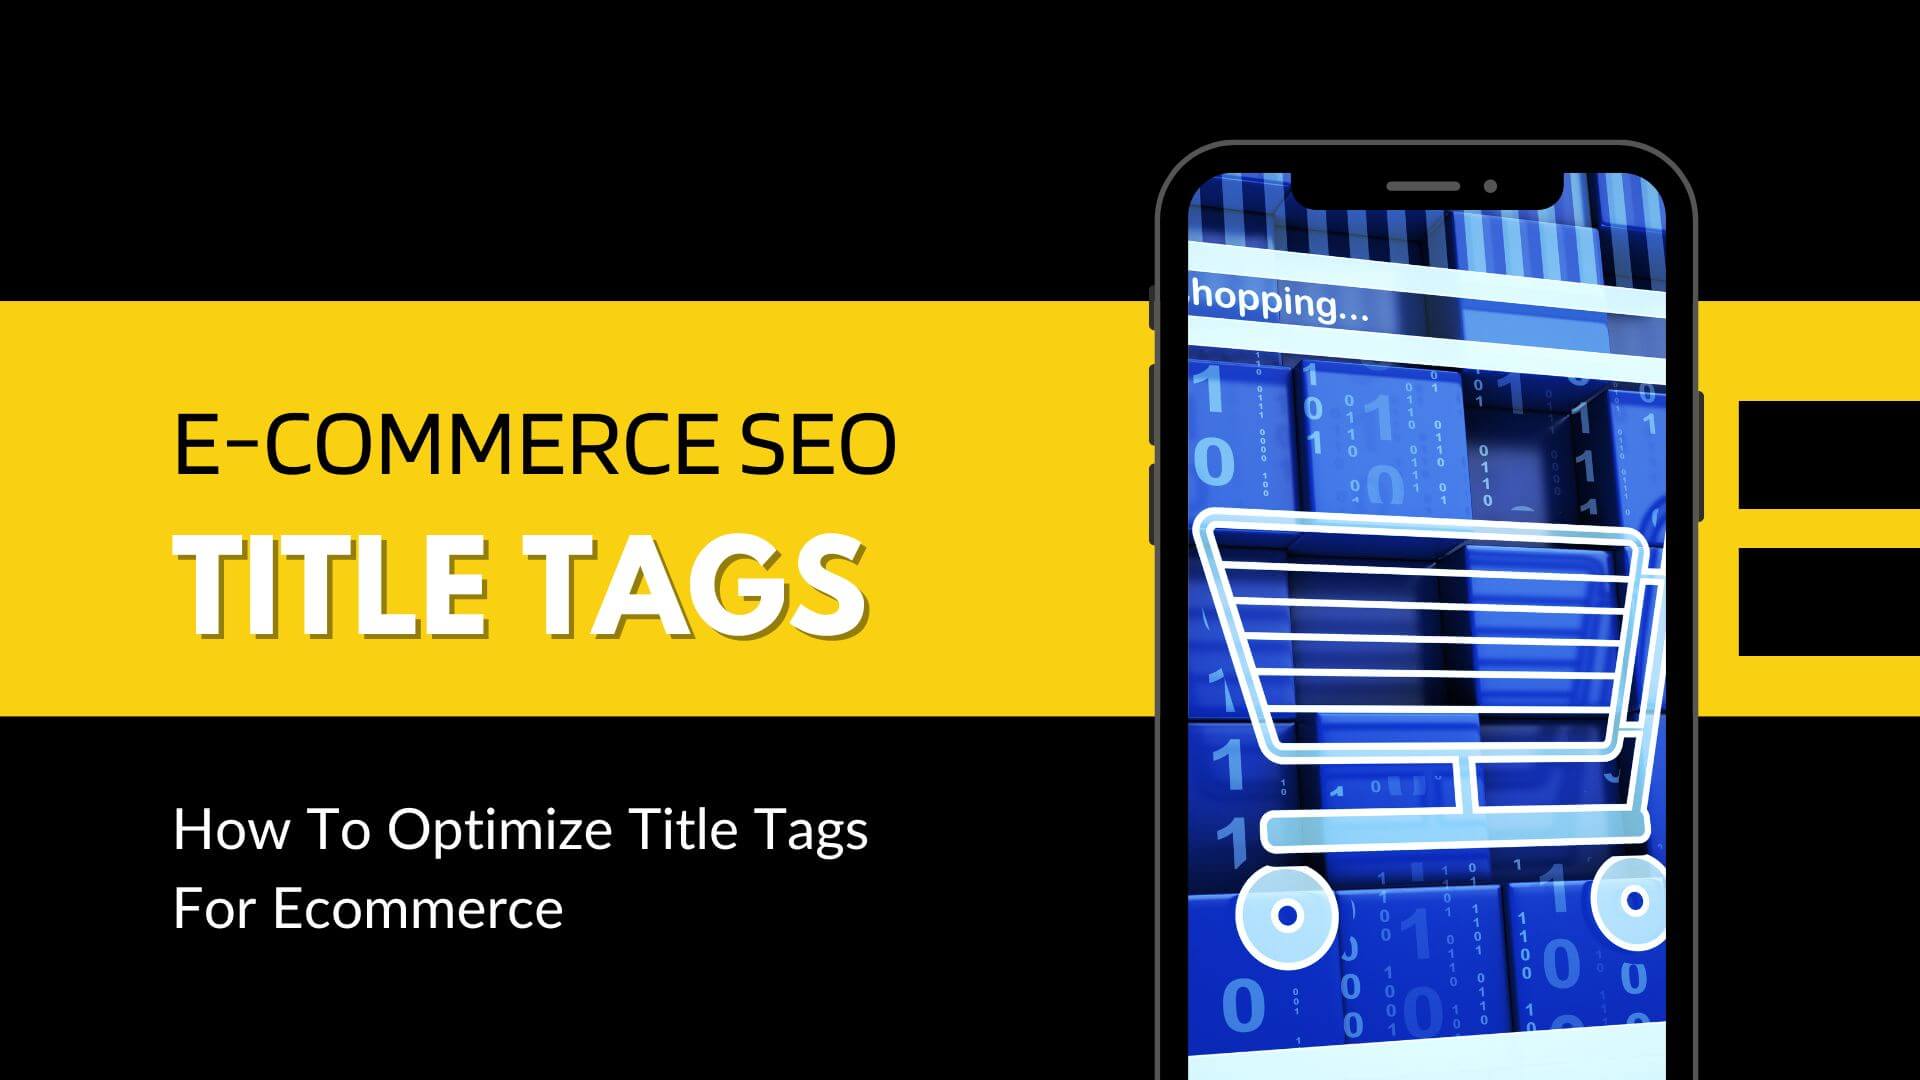 How To Optimize Title Tags For Ecommerce